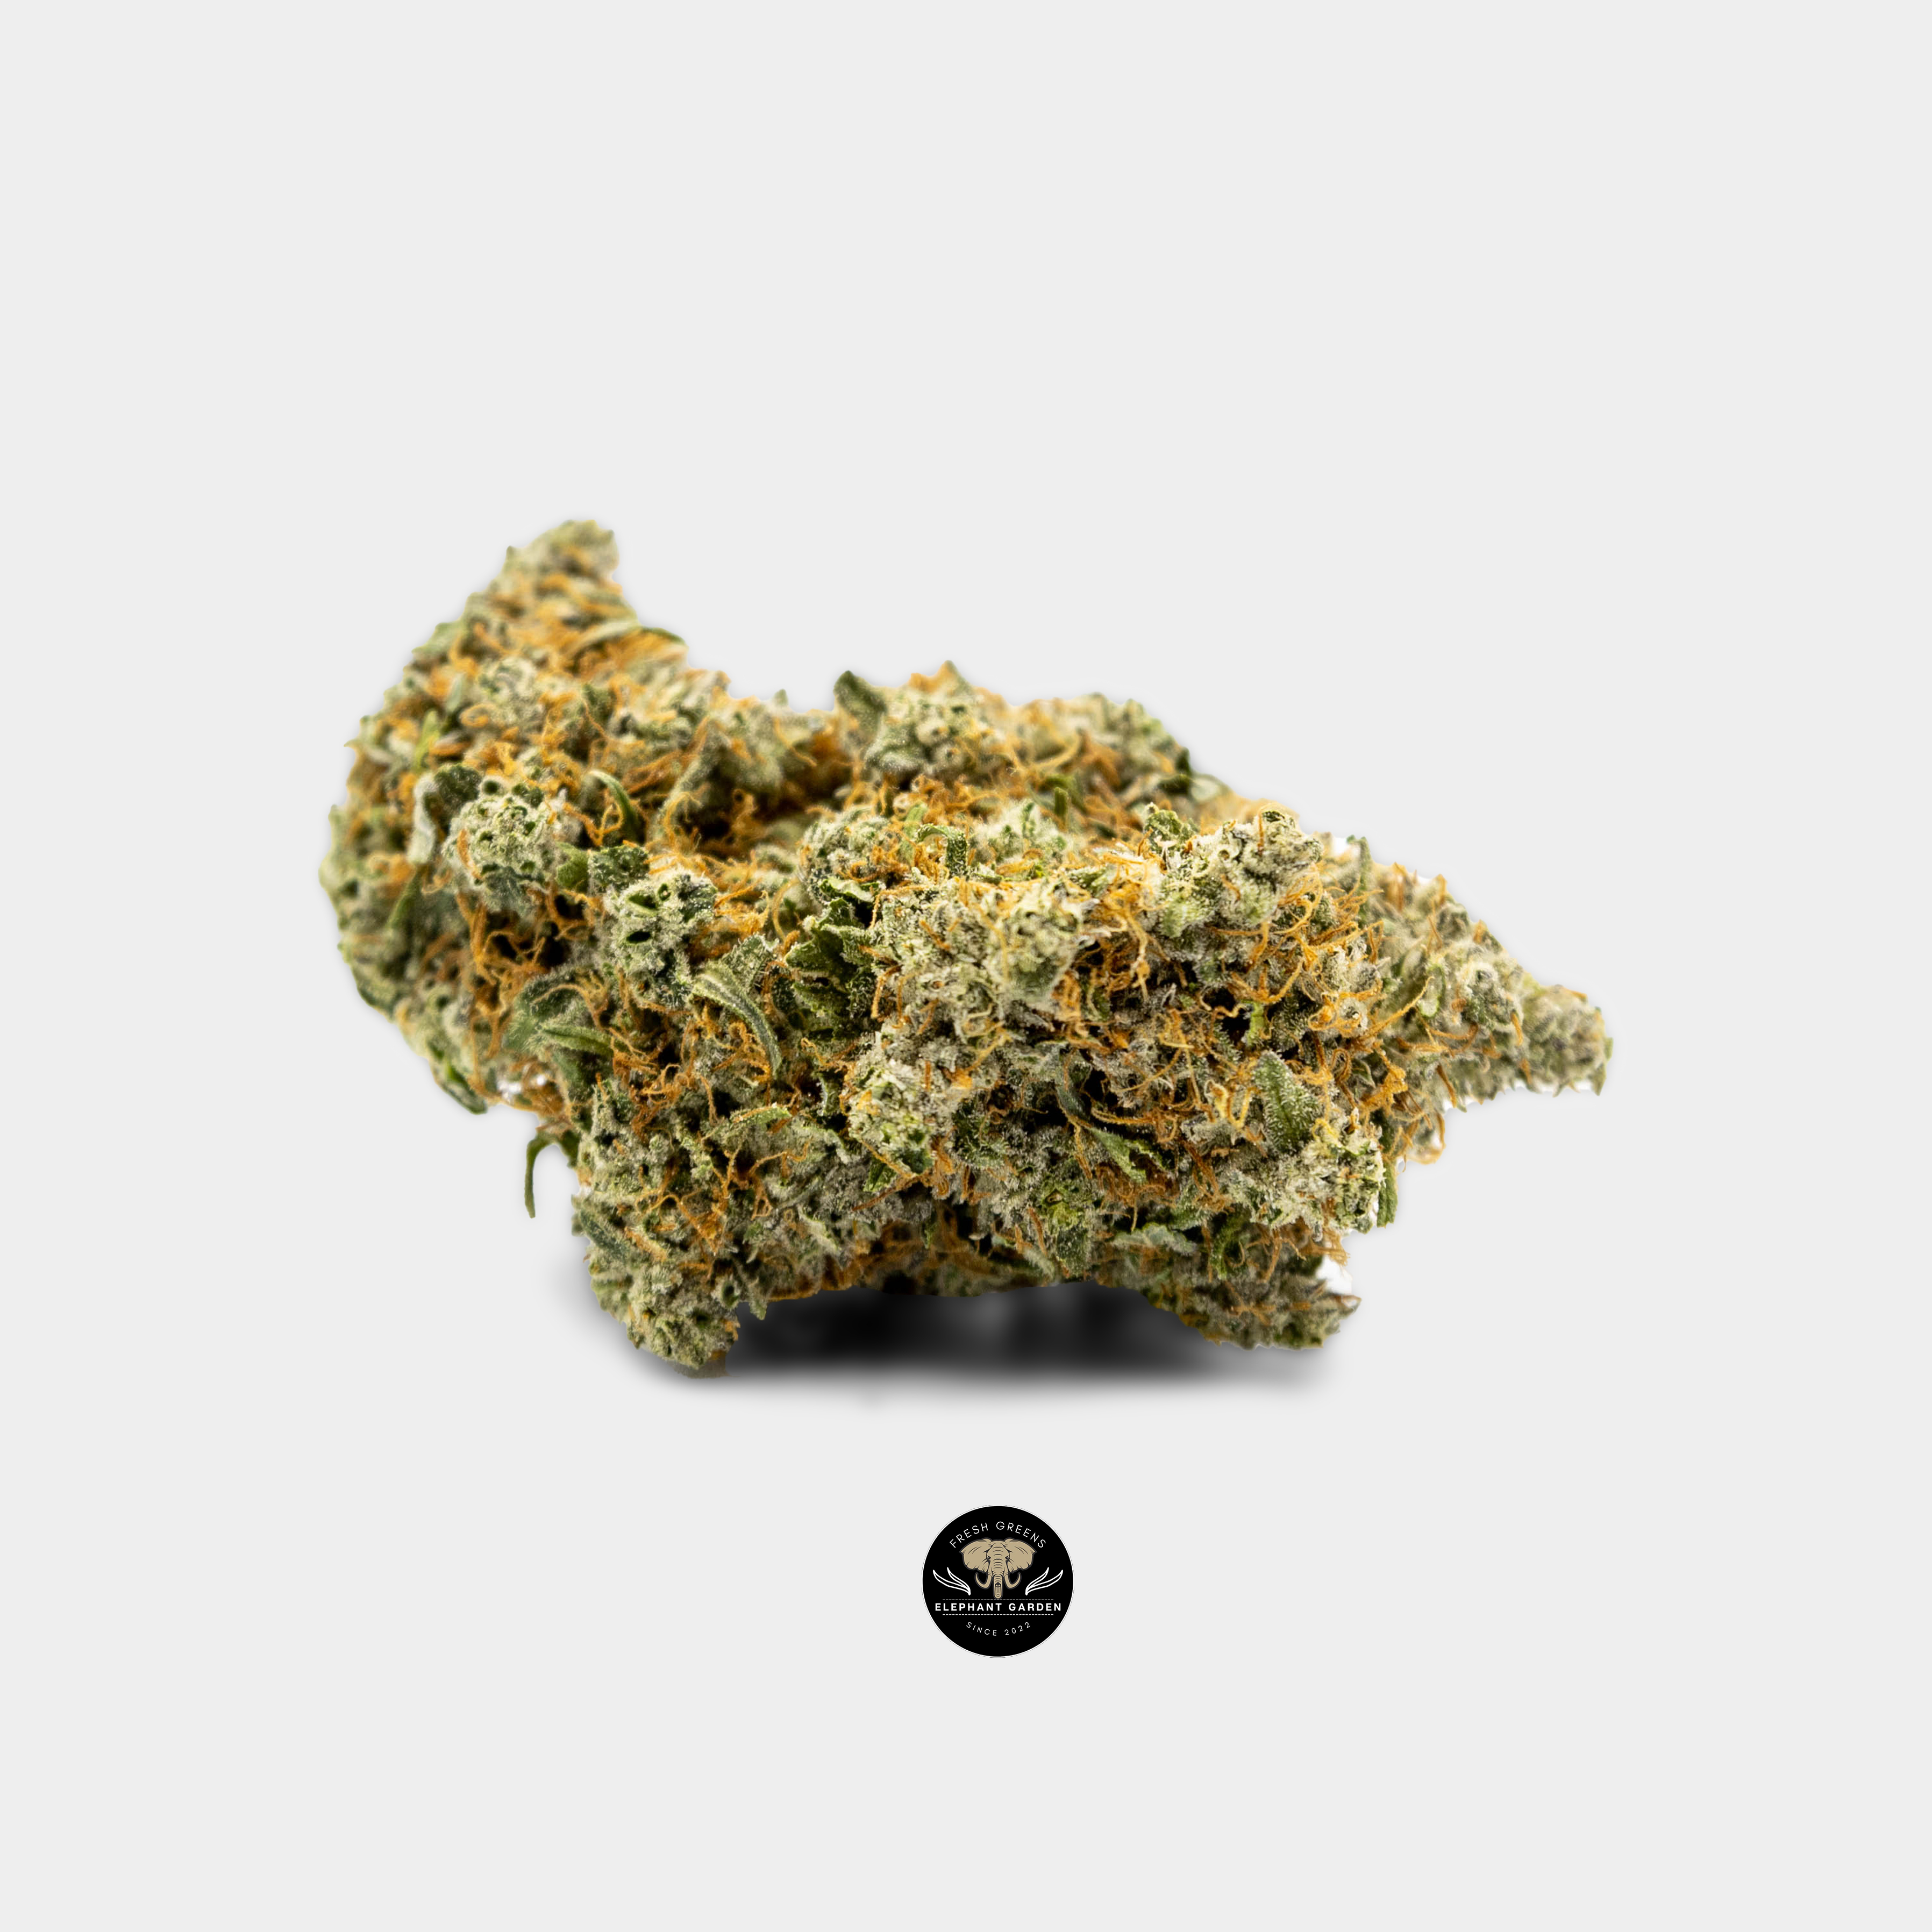 Buy Tahoe OG at Elephant Garden Co Weed Dispensary Online Canada Single